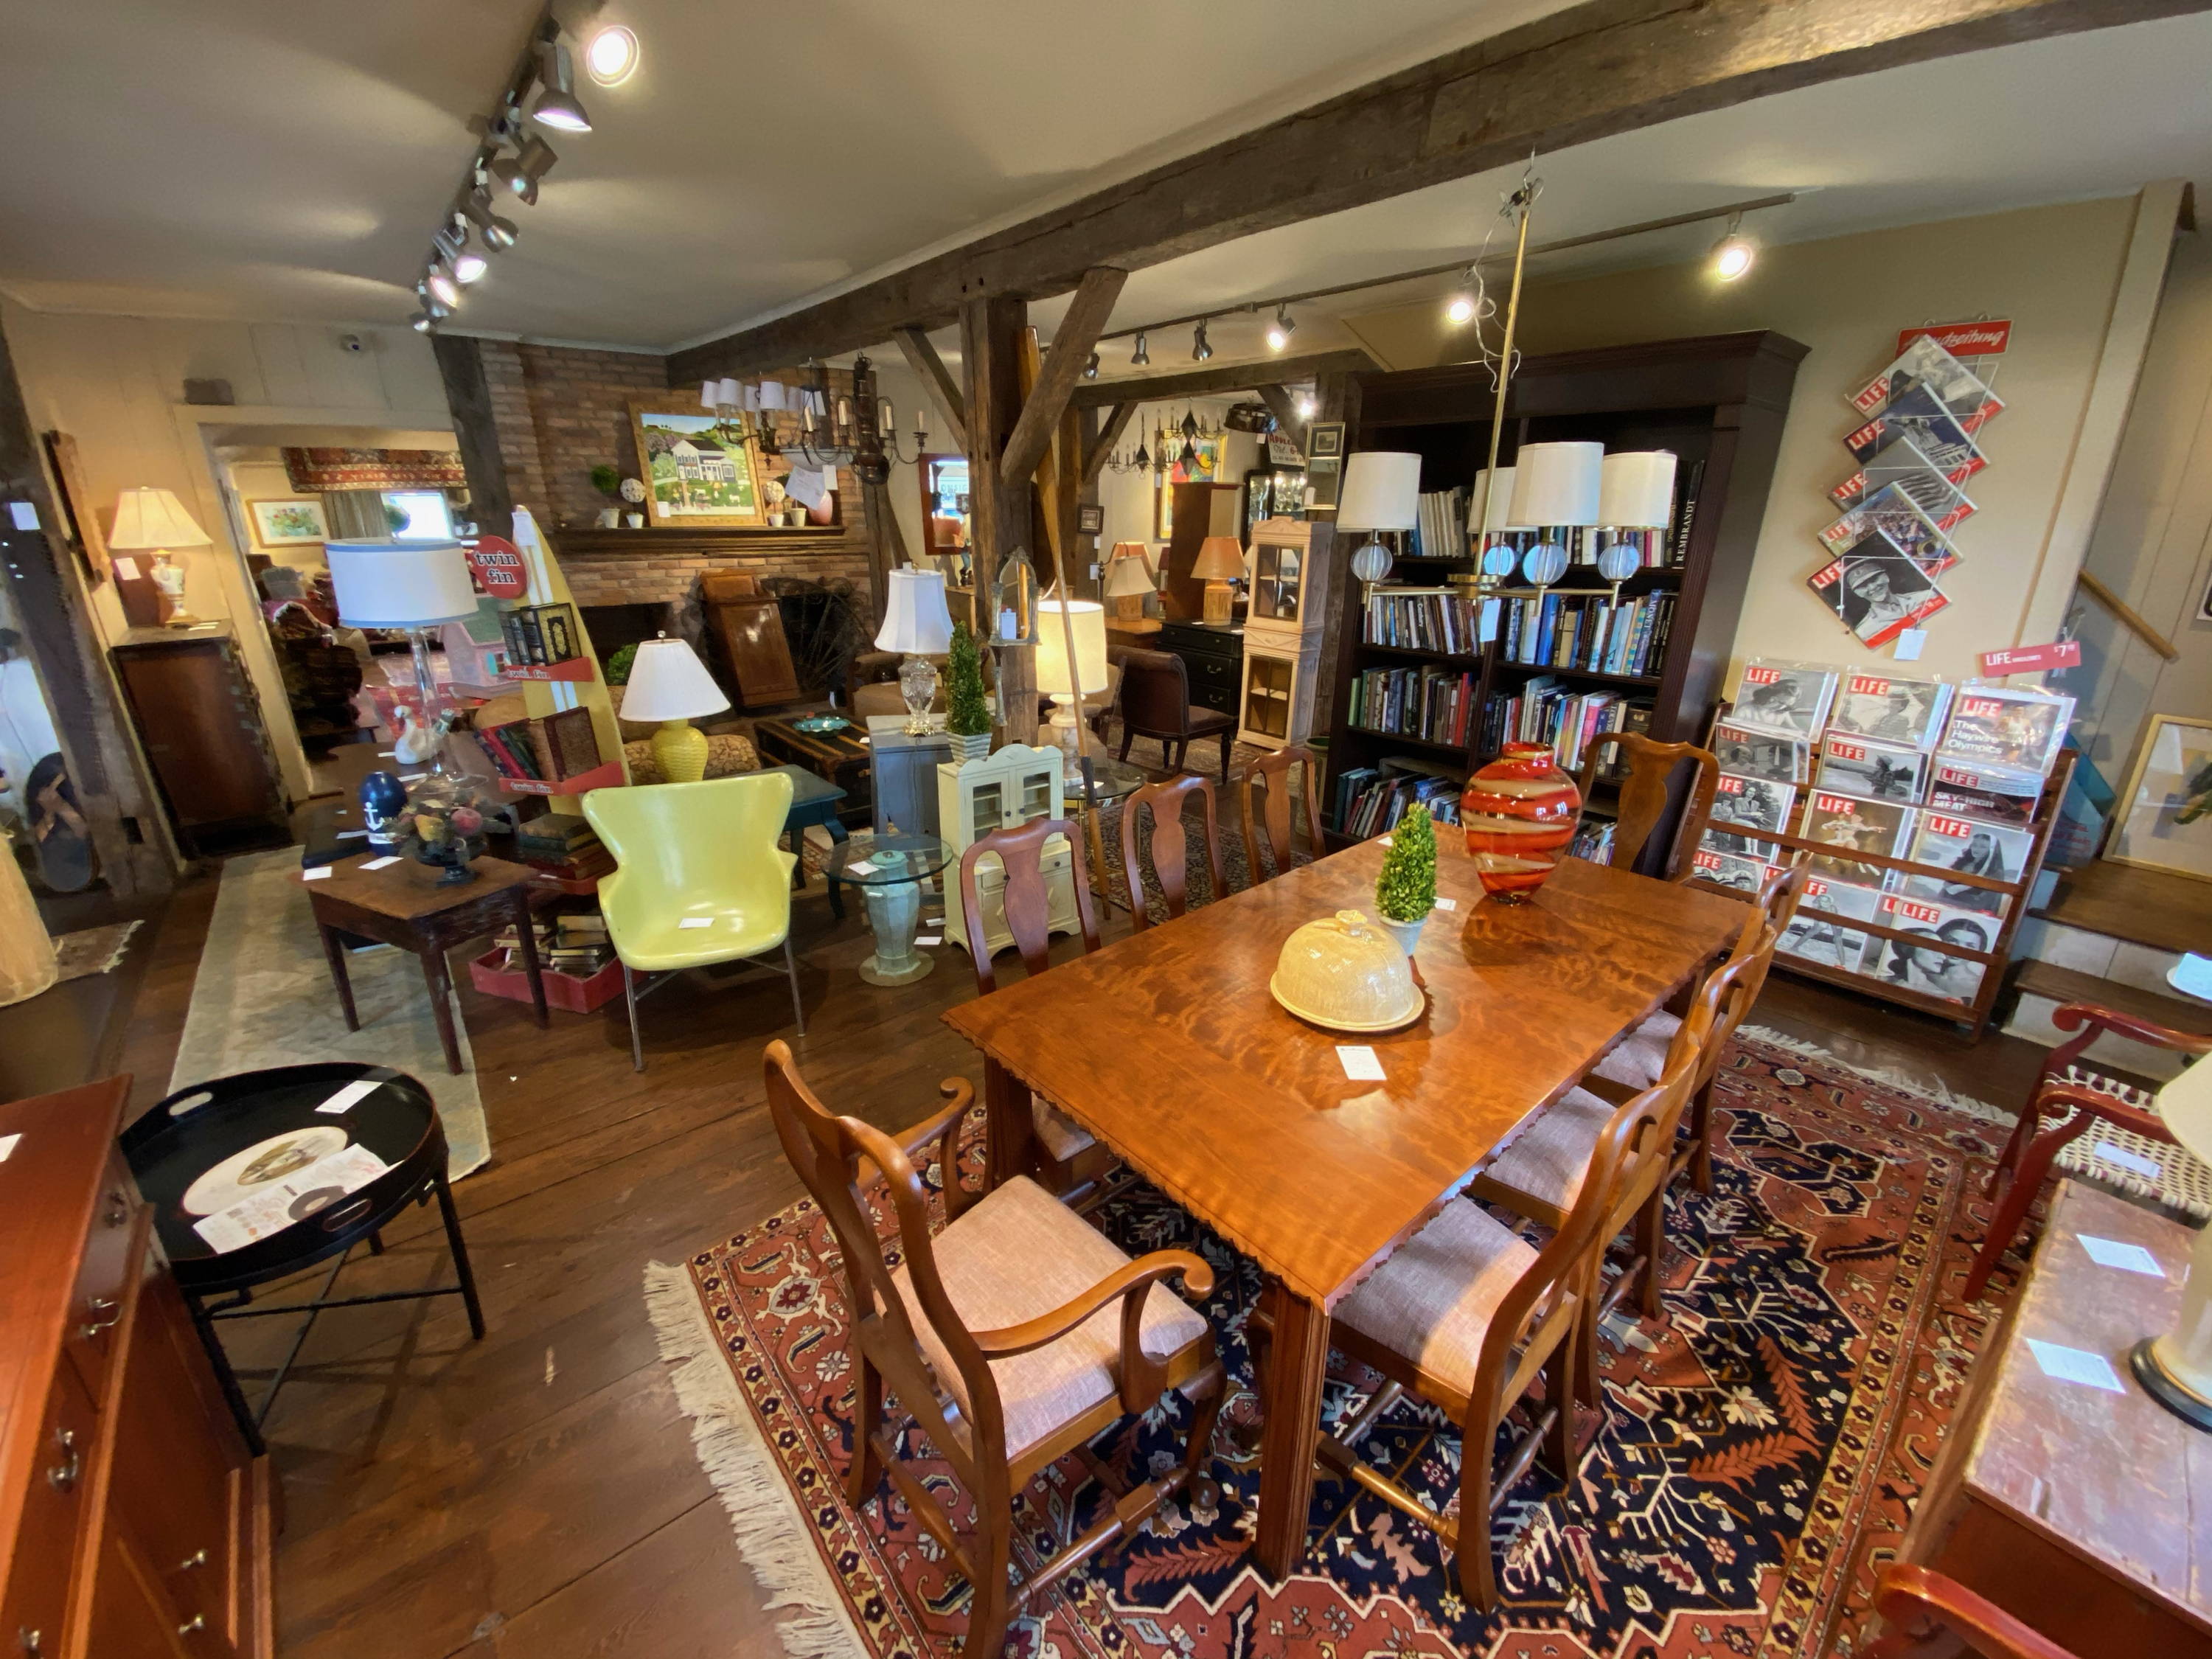 Southern Housepitality: Your Upscale Furniture Consignment Store